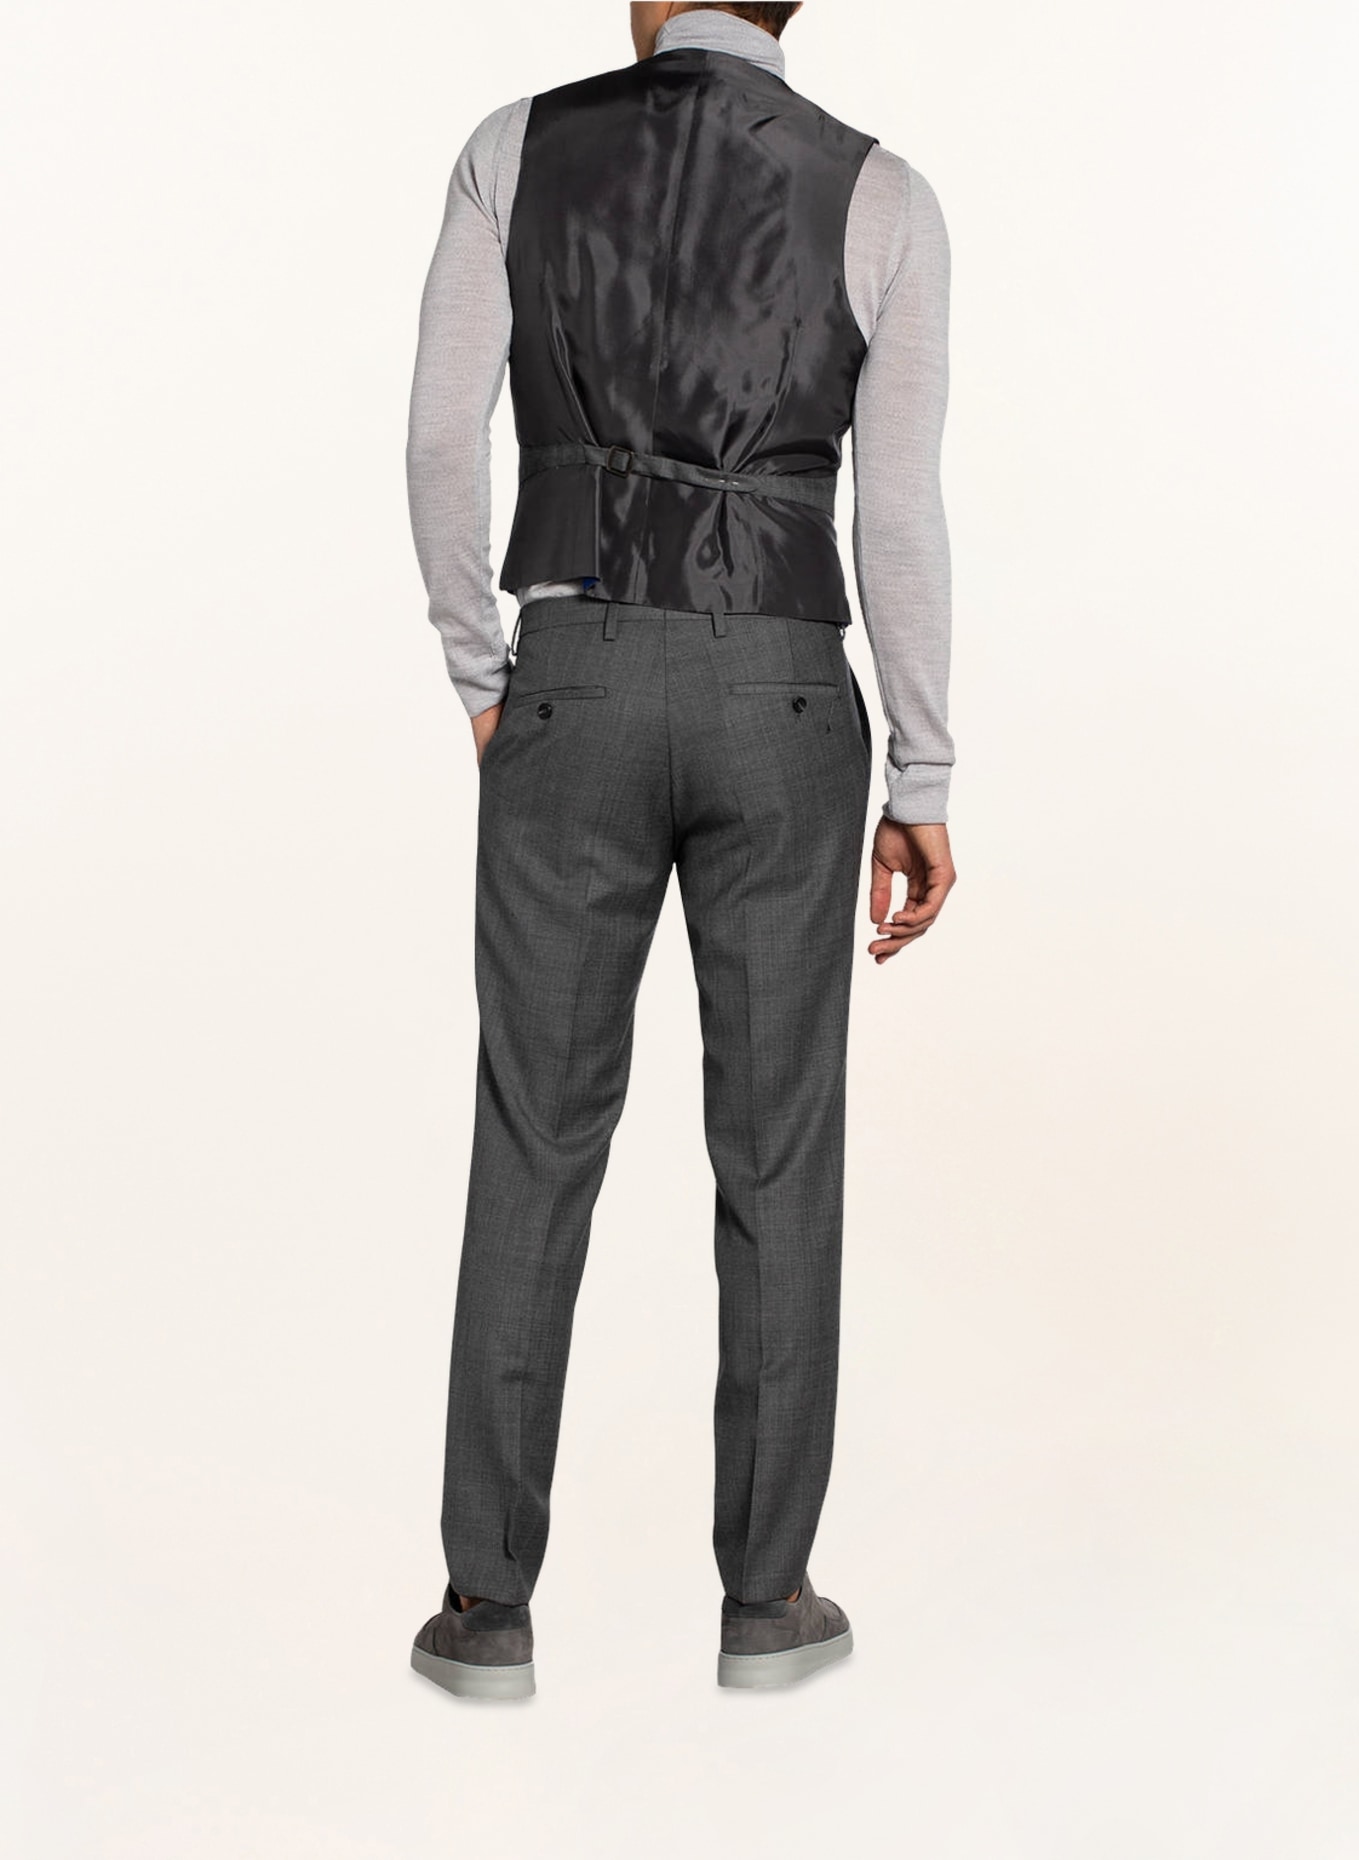 CG - CLUB of GENTS Suit trousers CHAZ regular fit, Color: 81 grau hell (Image 4)